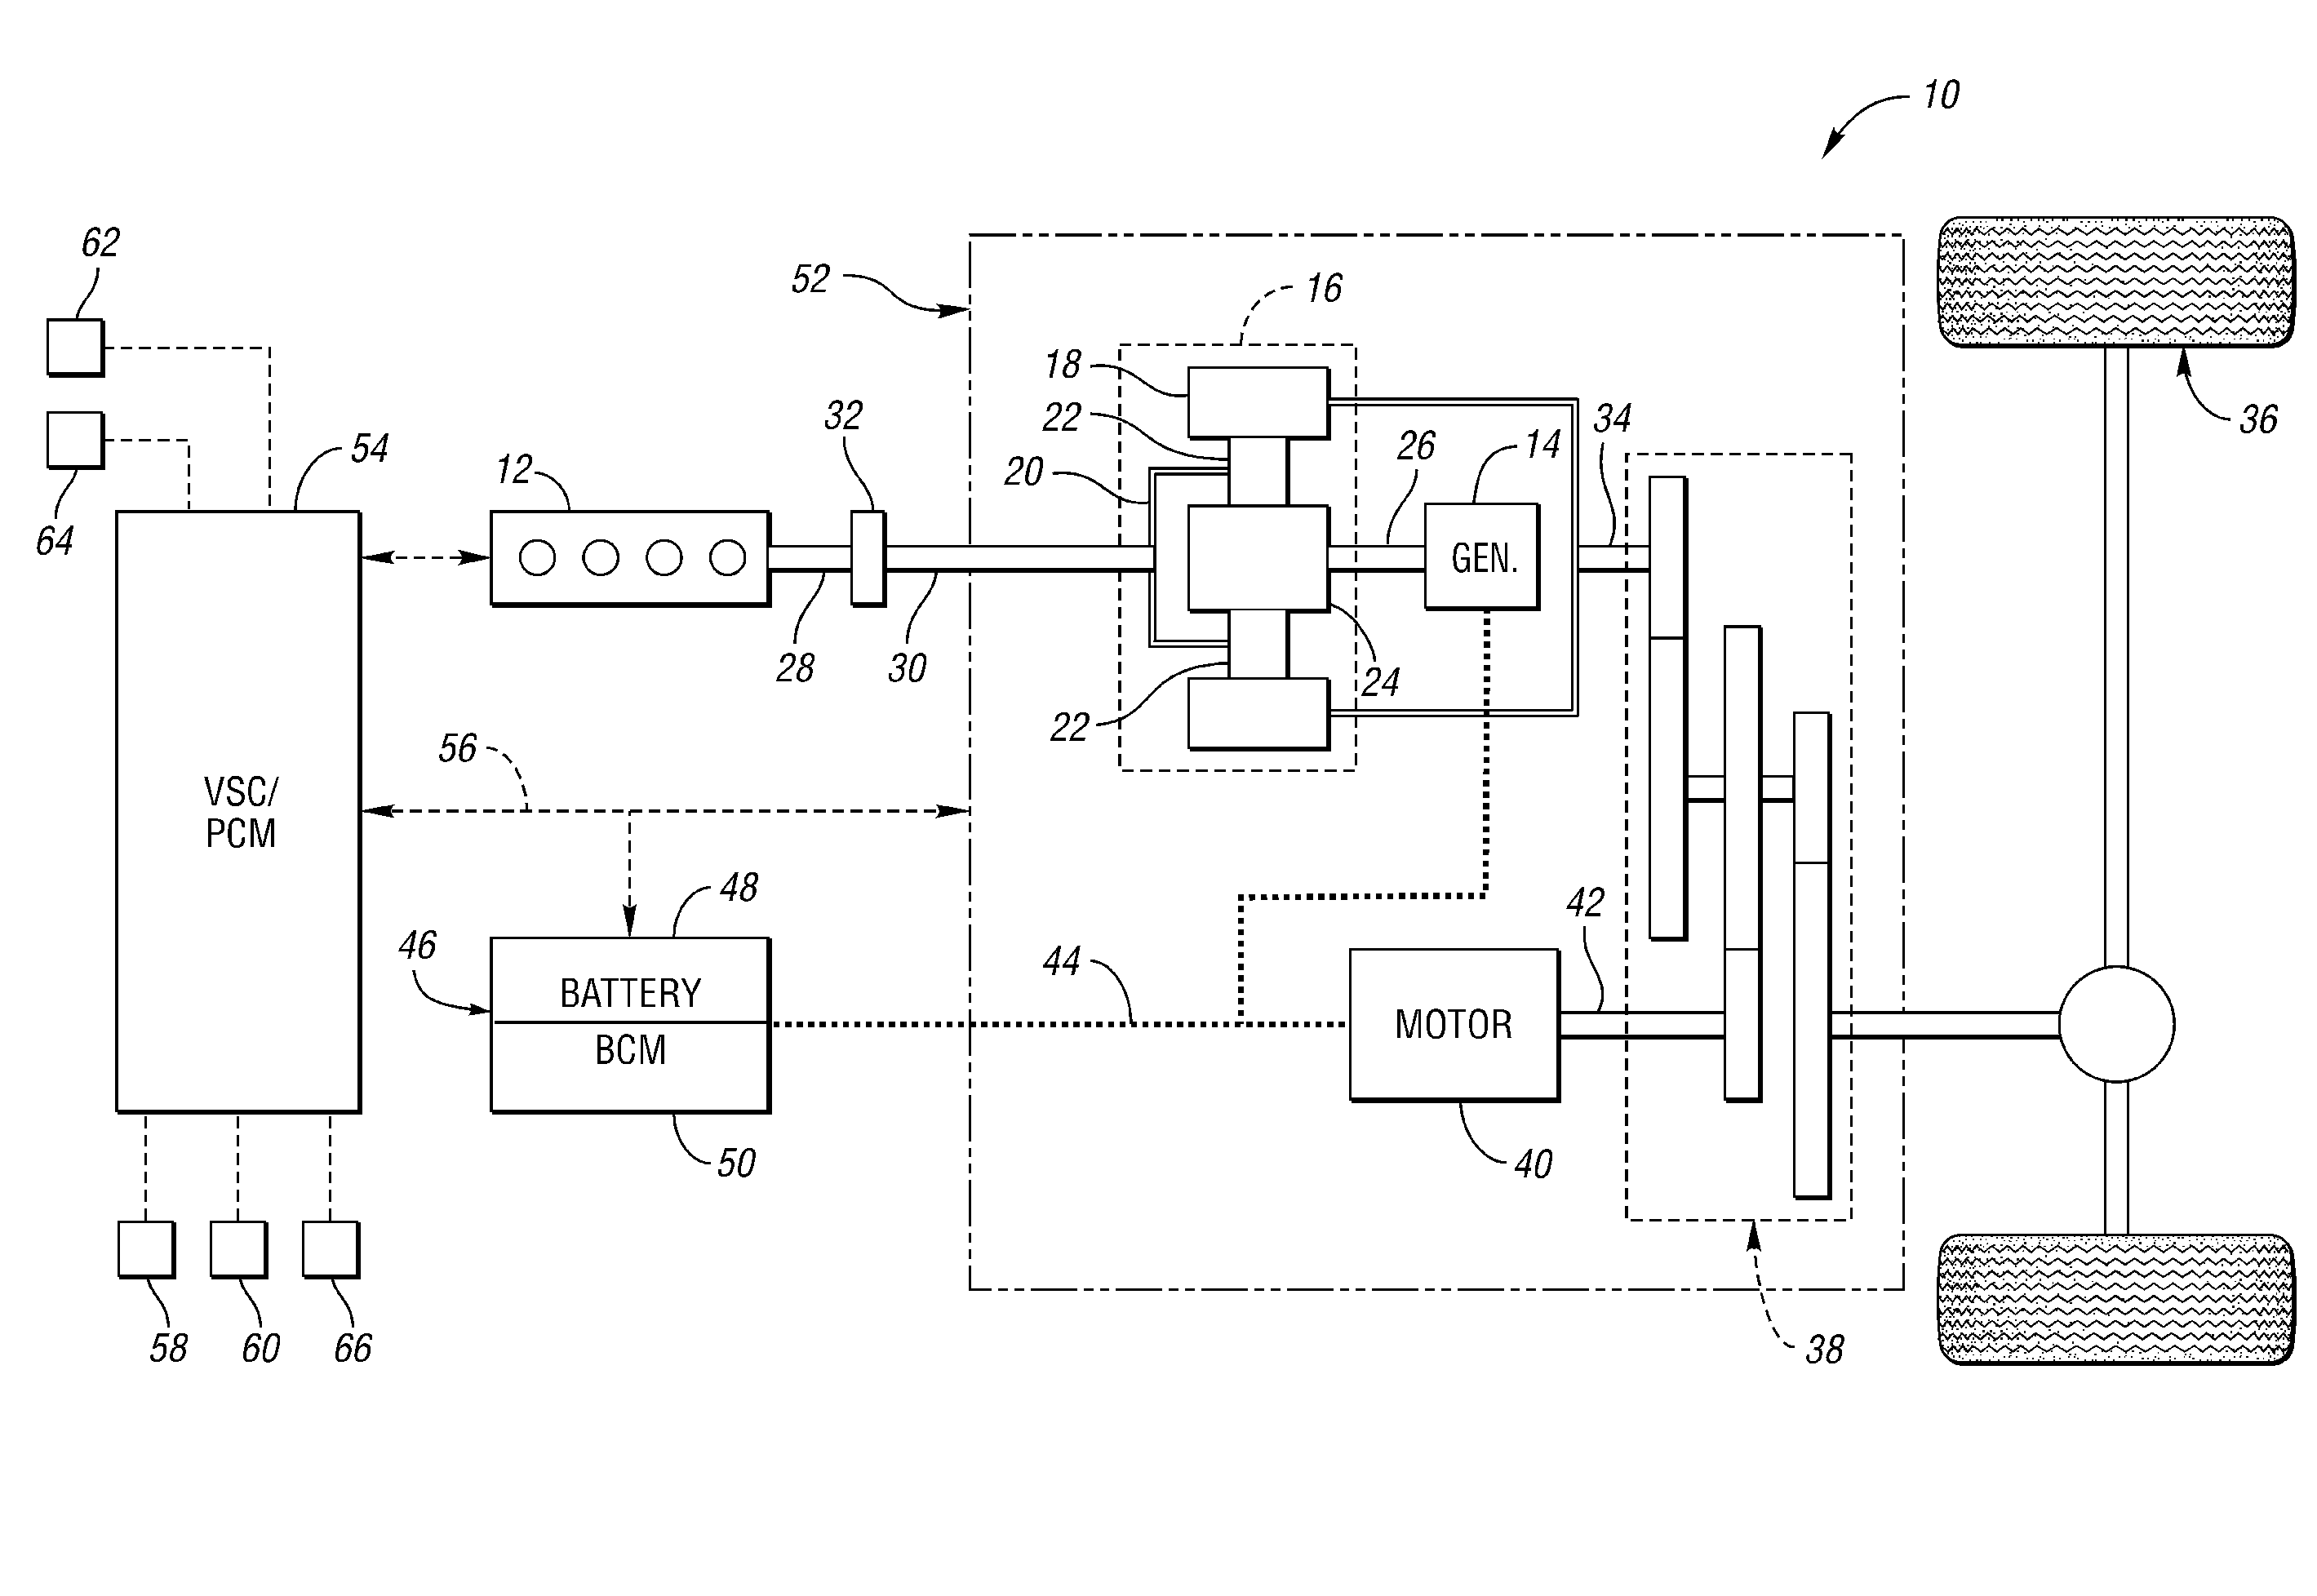 System and method for controlling a state of charge of an energy storage system